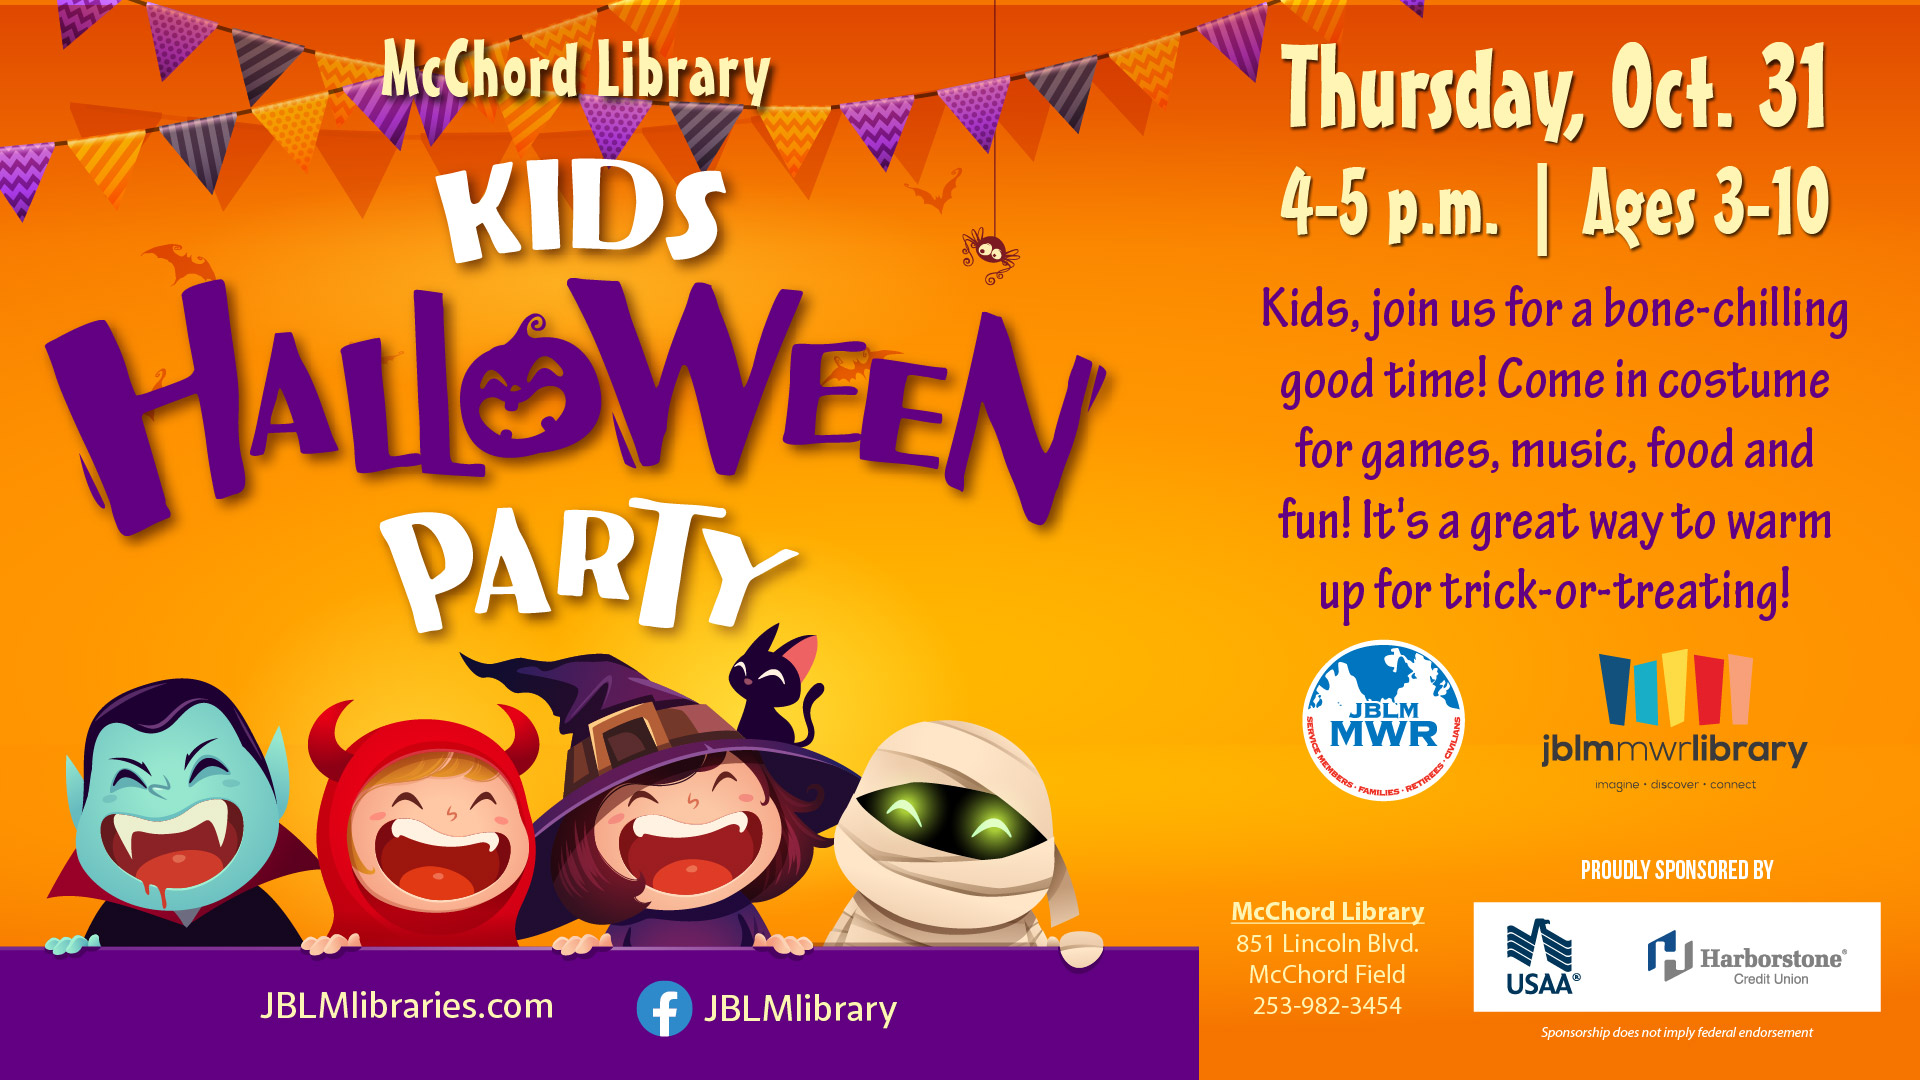 US Army MWR :: View Event :: Kids Halloween Party